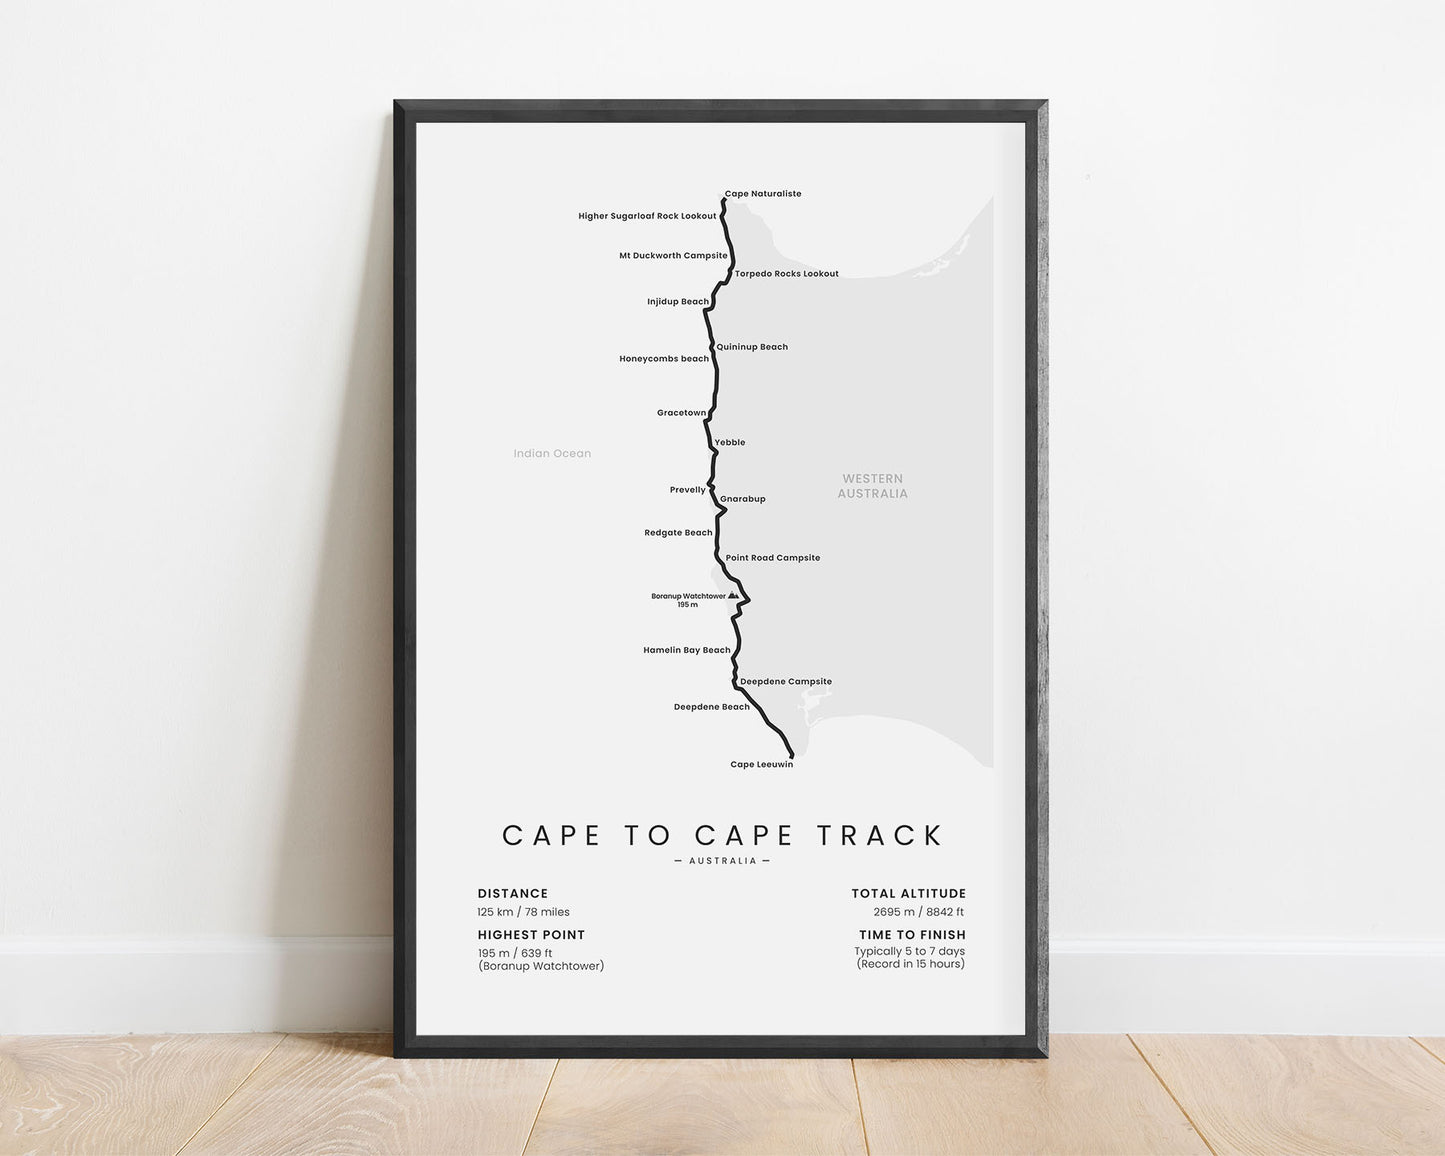 Cape to Cape Track (Western Australia) route poster with white background